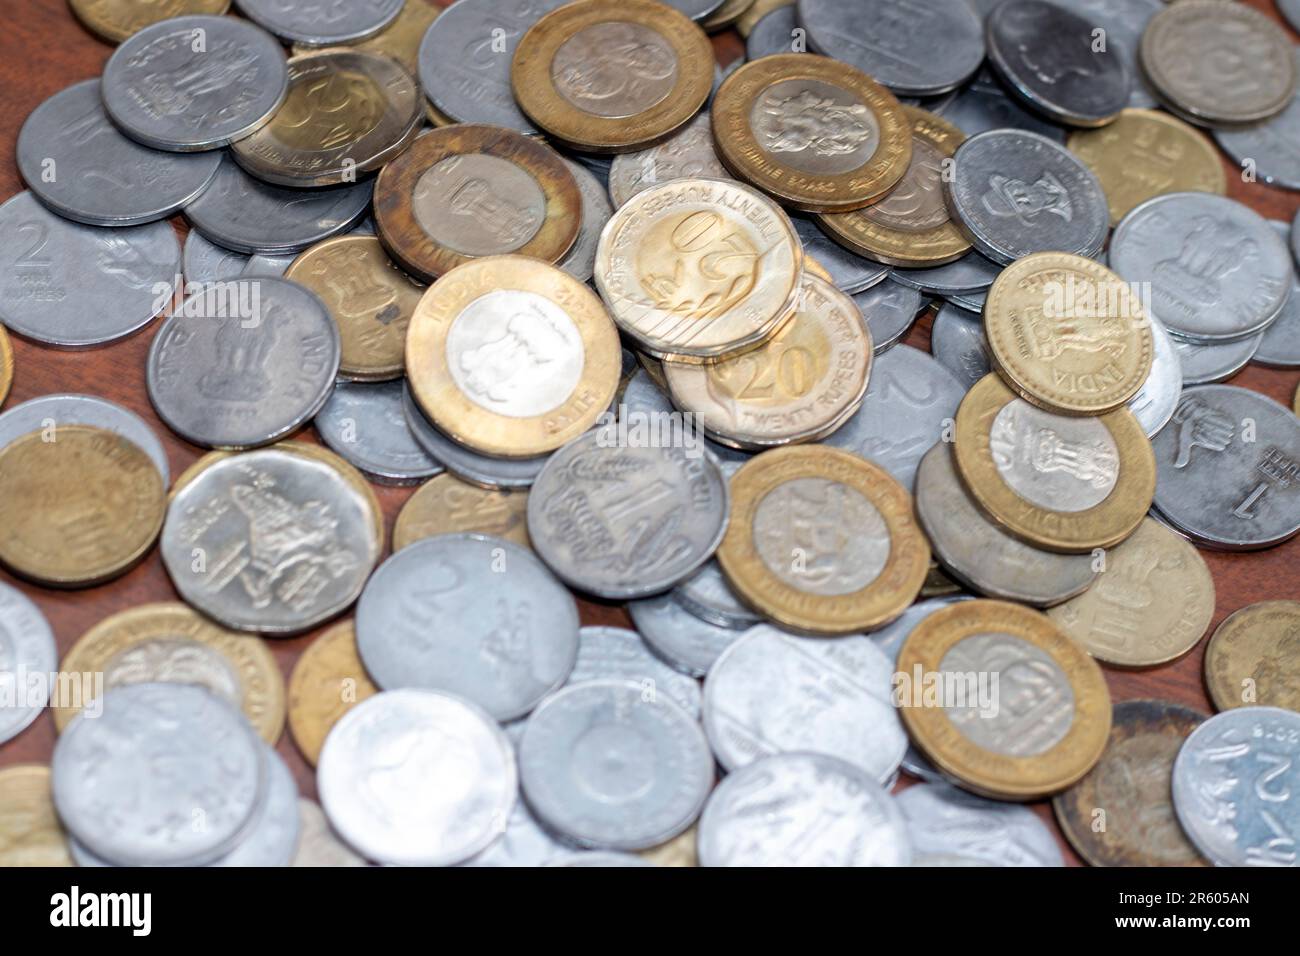 Collection of Indian currency coins Stock Photo